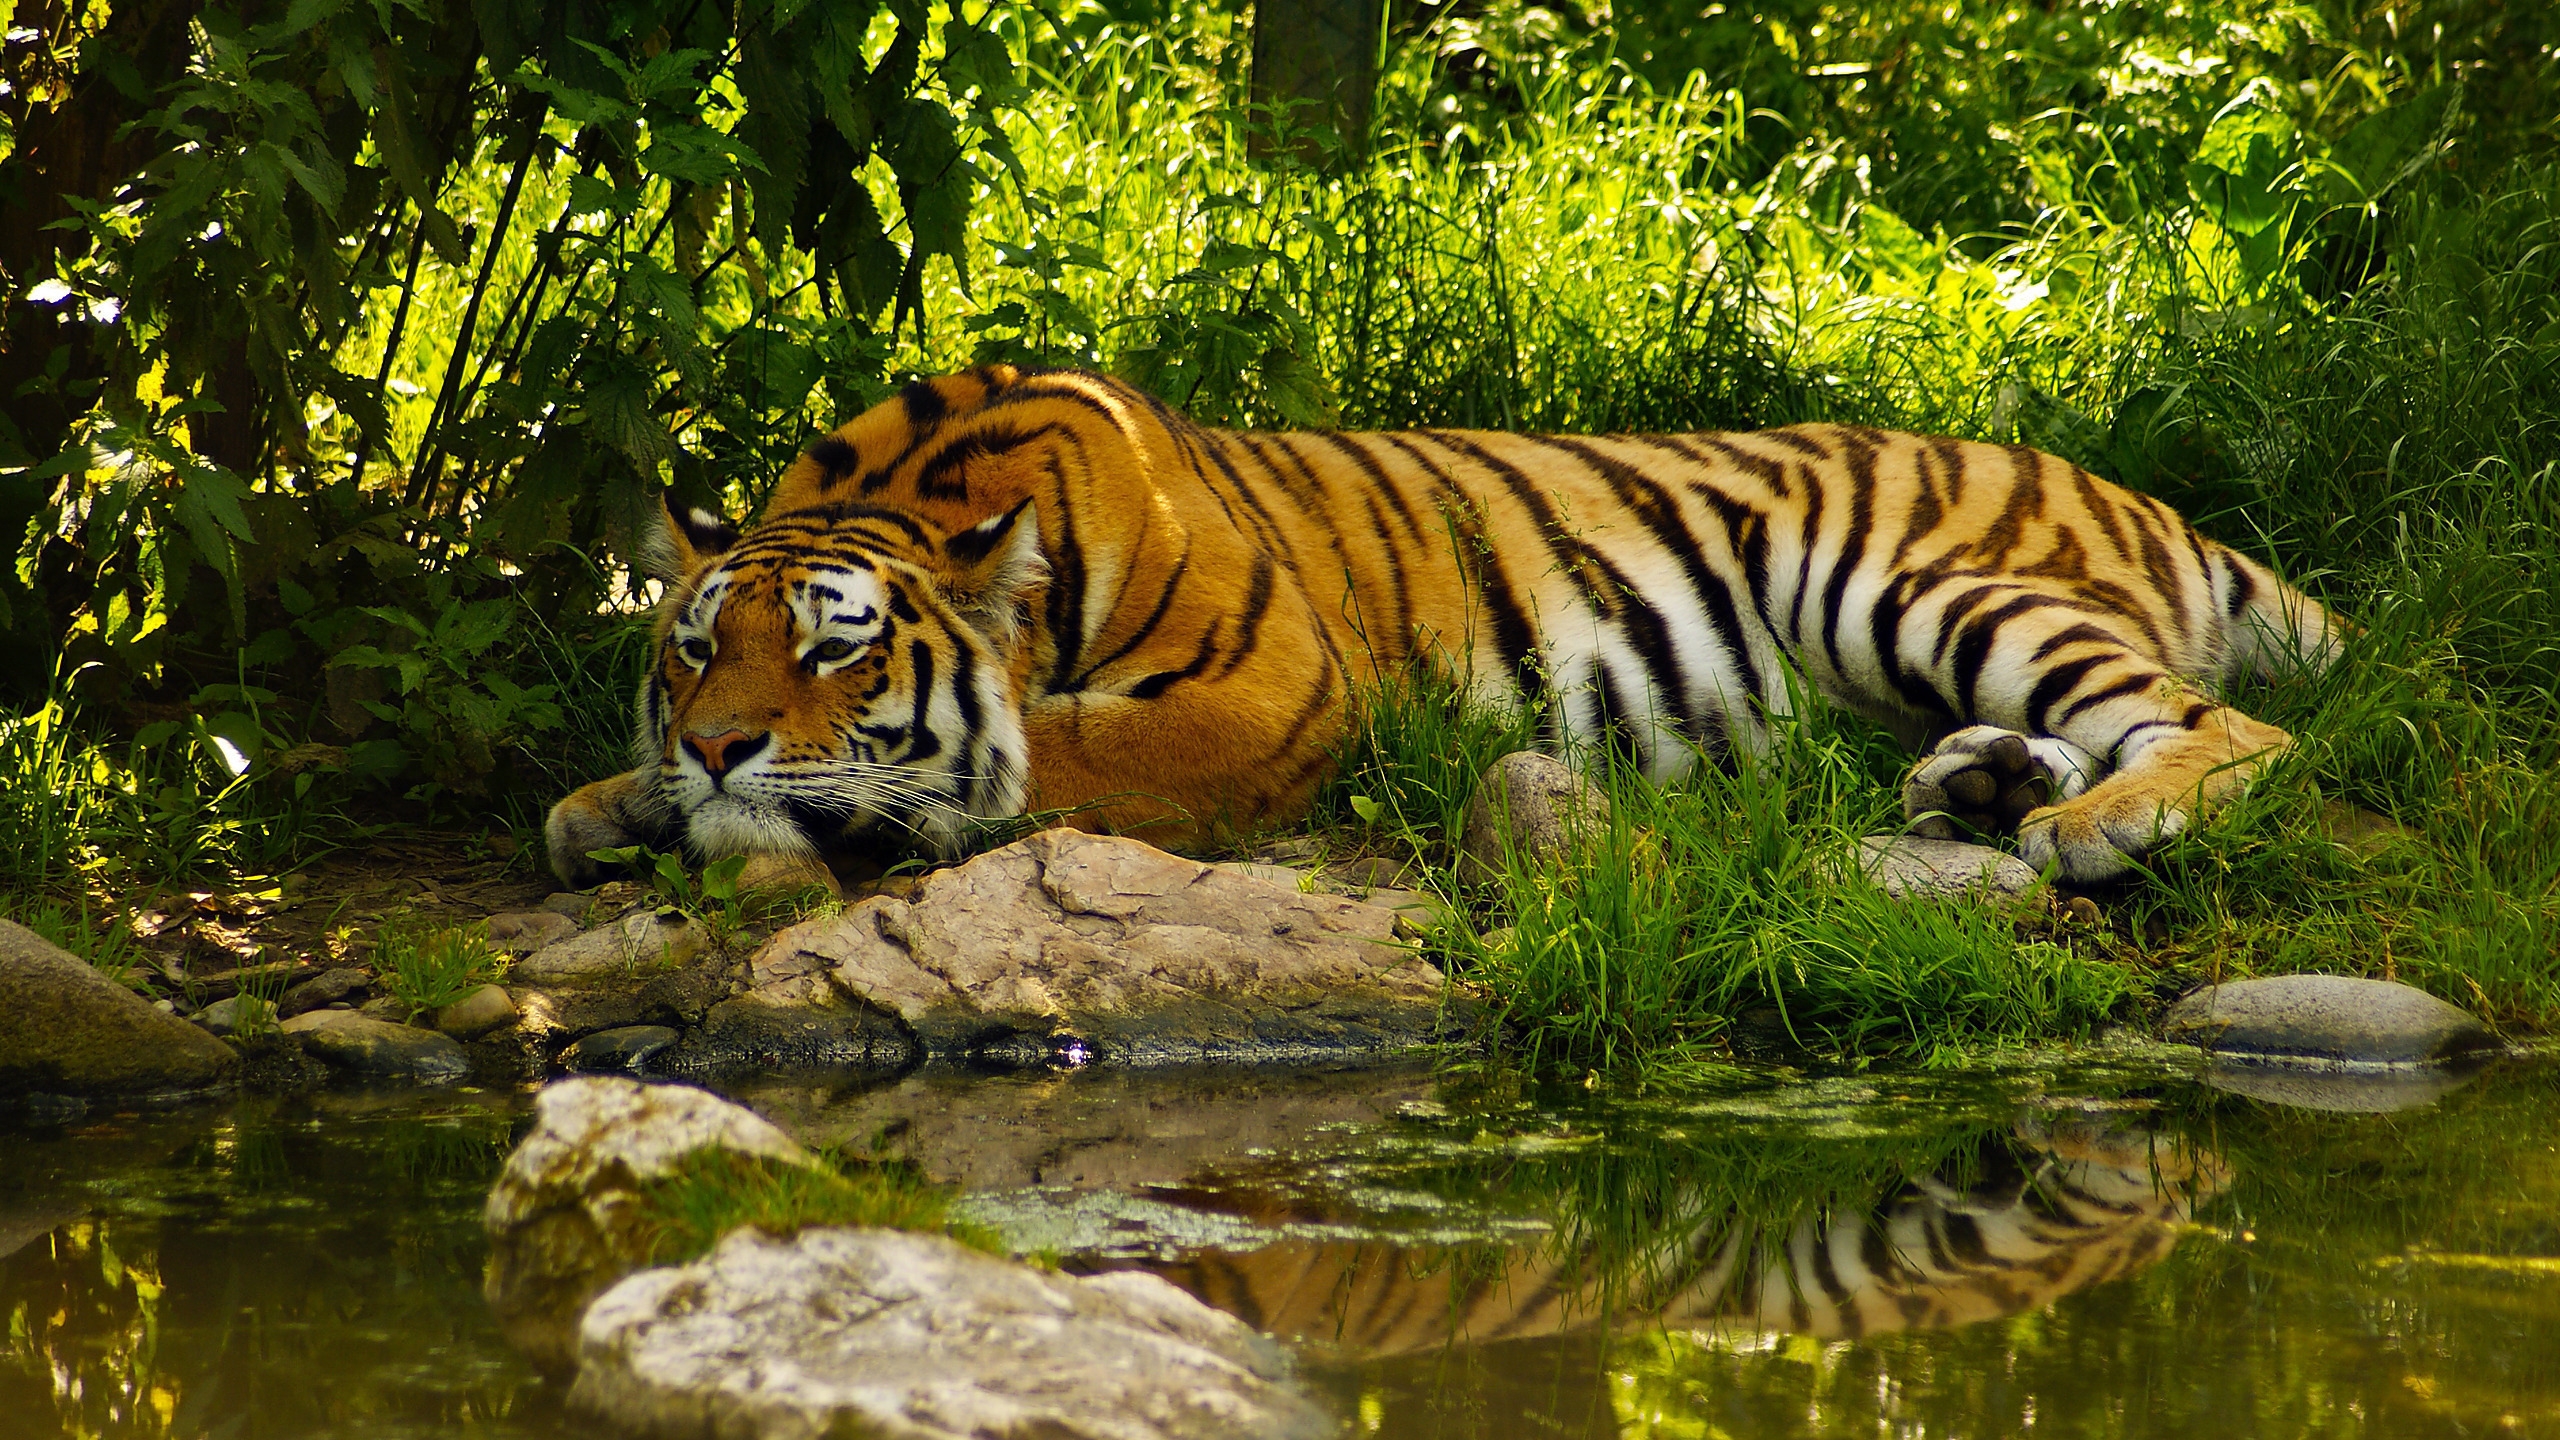 Amazing Tiger for 2560x1440 HDTV resolution